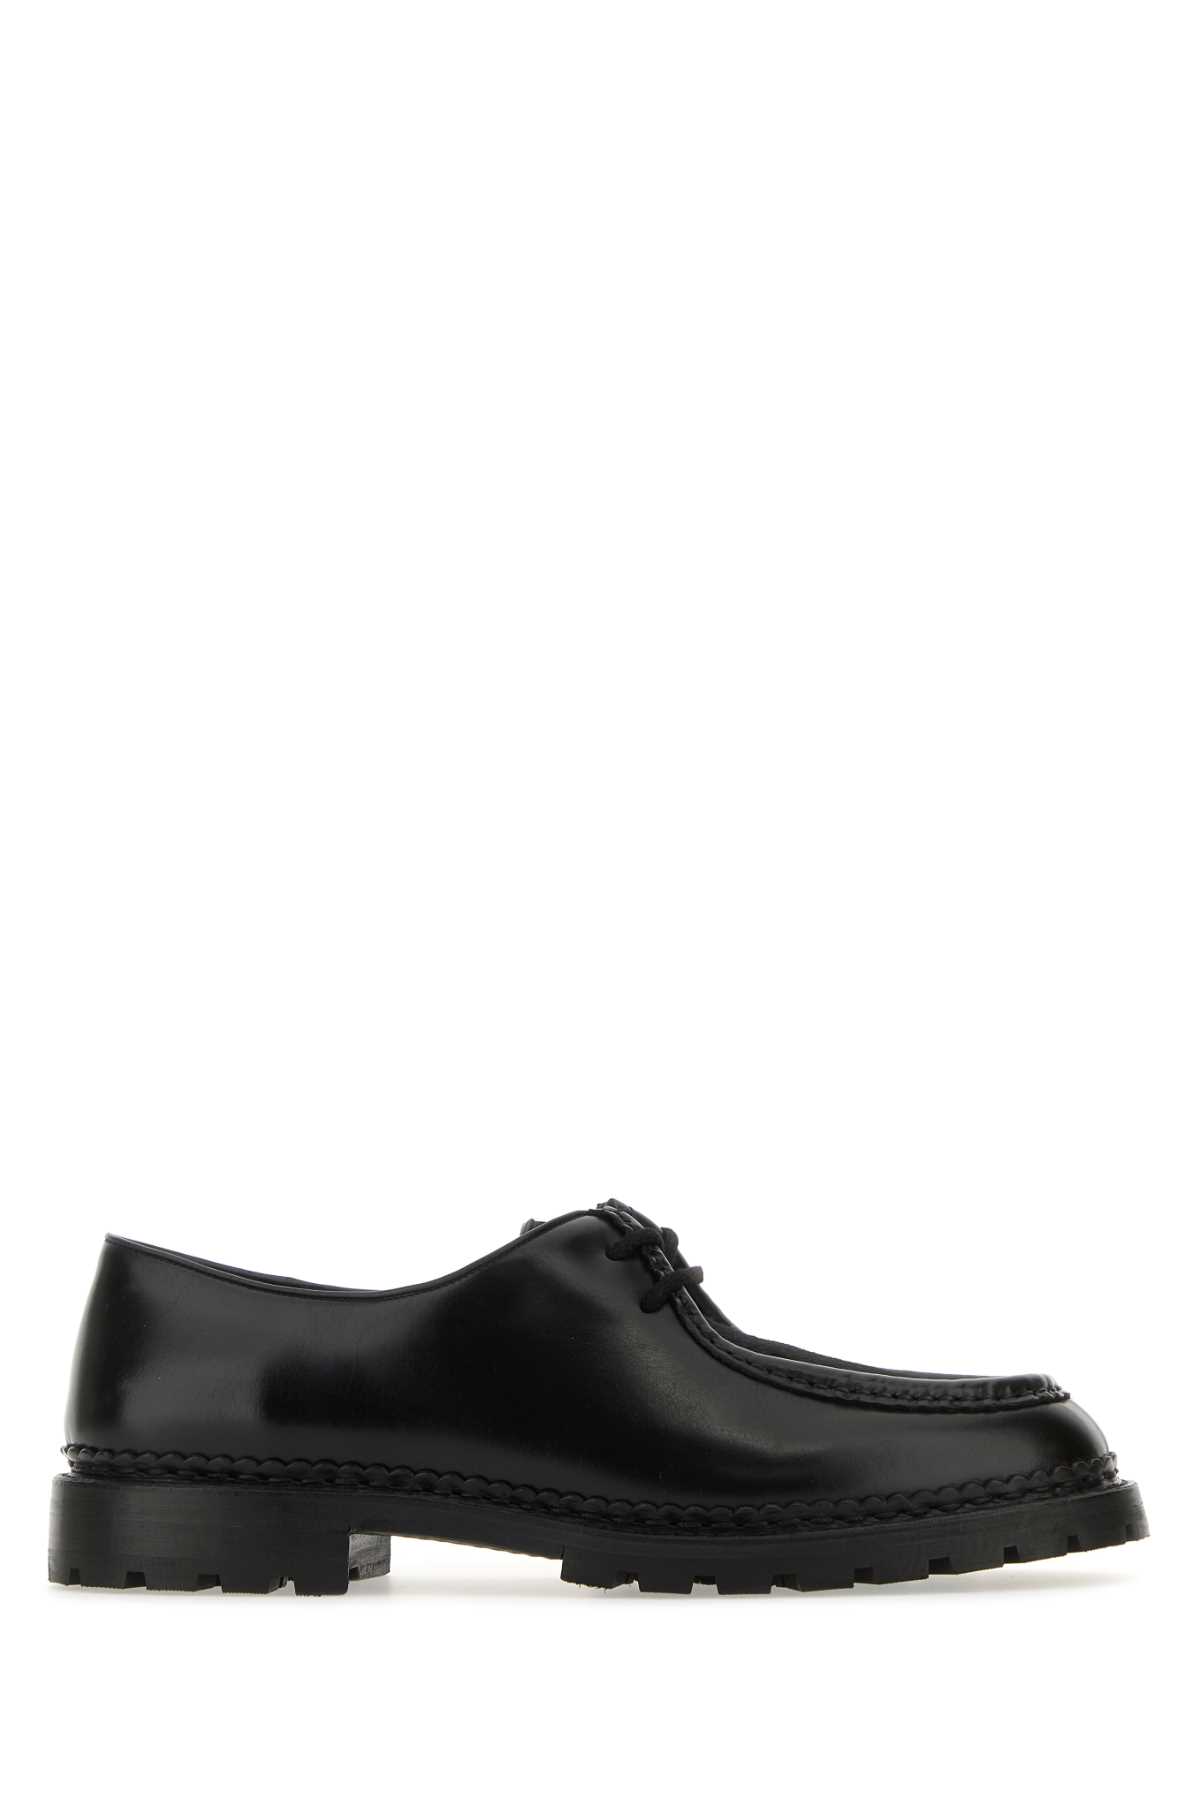 Saint Laurent Leather And Calf Hair Lace-up Shoes